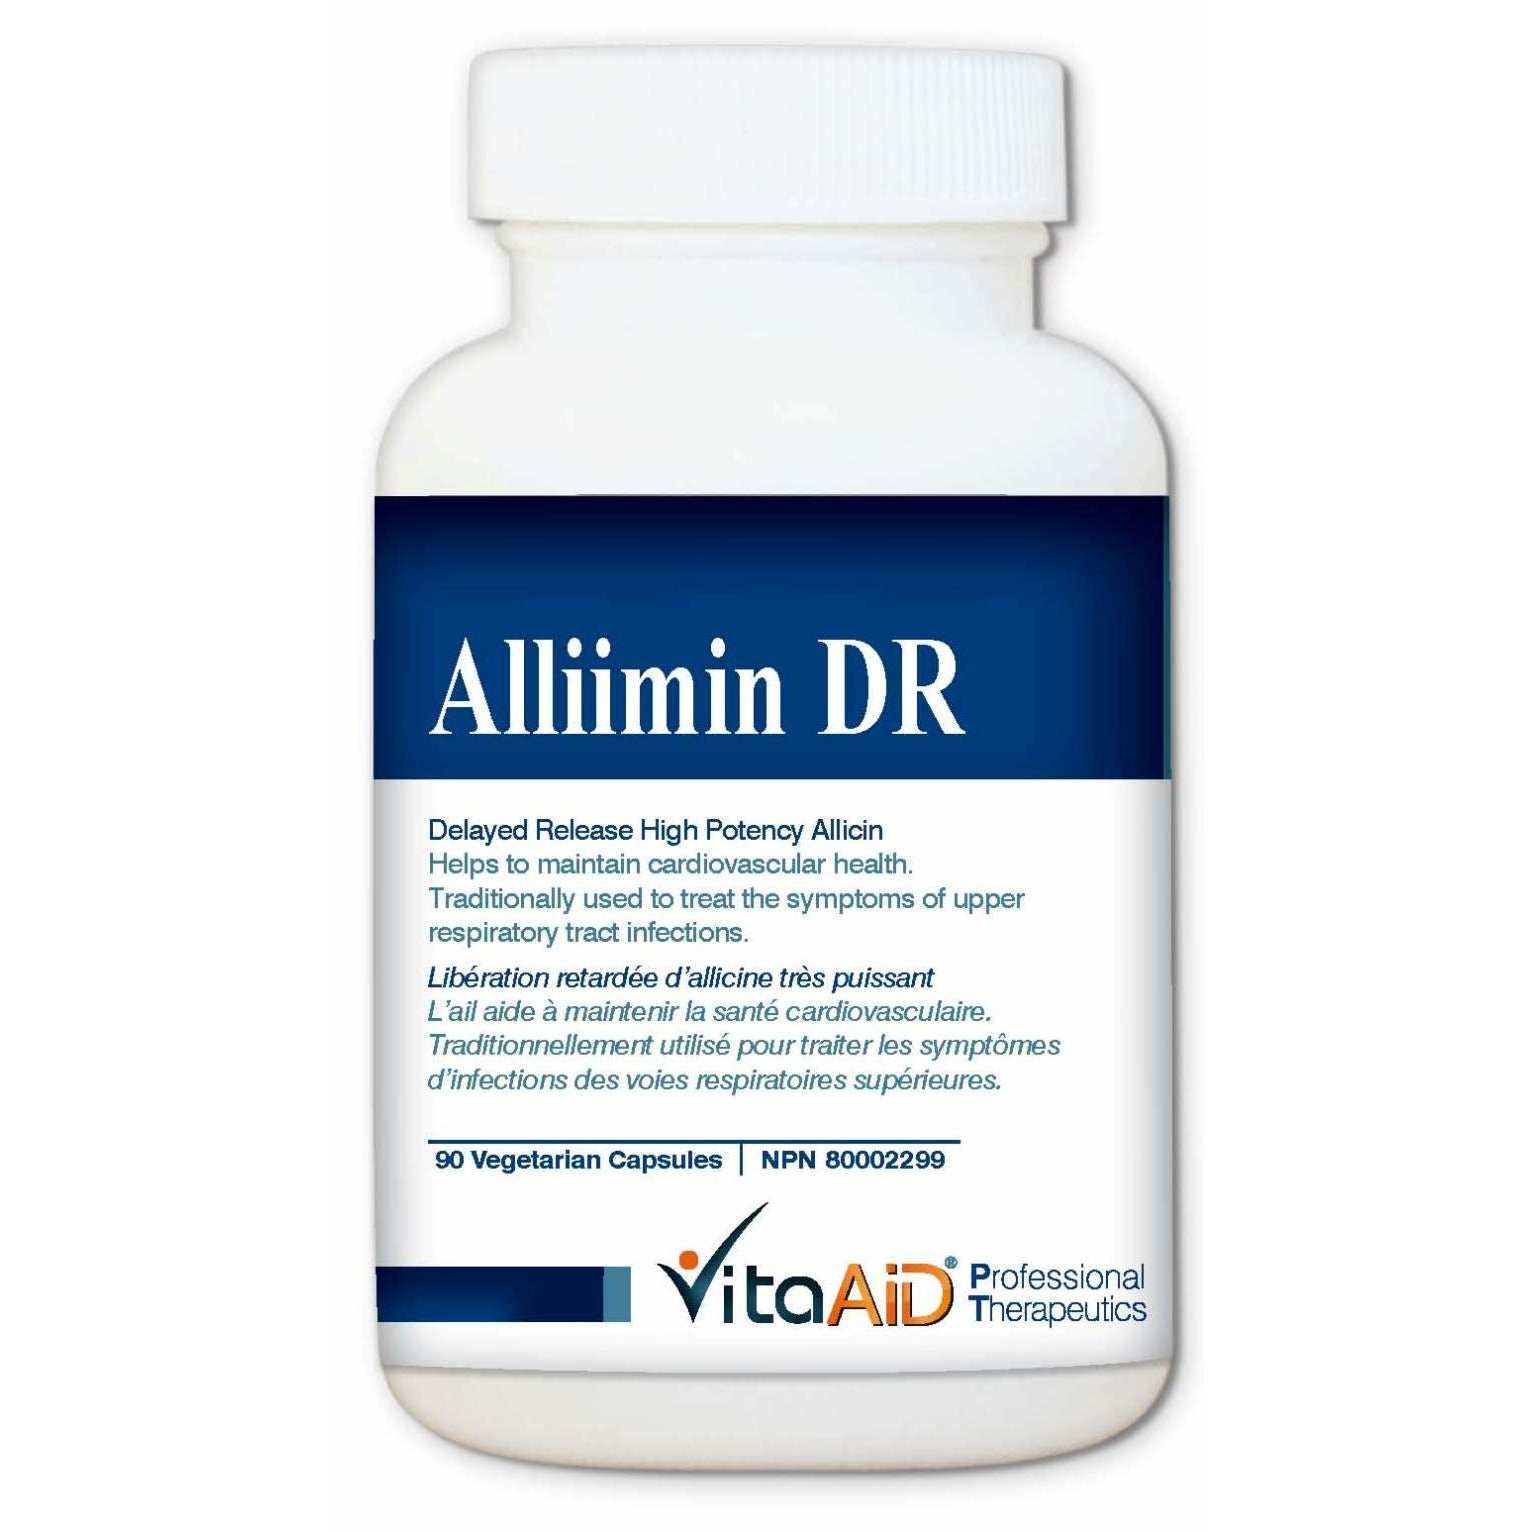 Alliimin DR (Garlic Concentrate) Highly Potent Allicin Concentrate from Garlic in Entero-Dissolving Vegetarian Capsules 90 veg caps - iwellnessbox